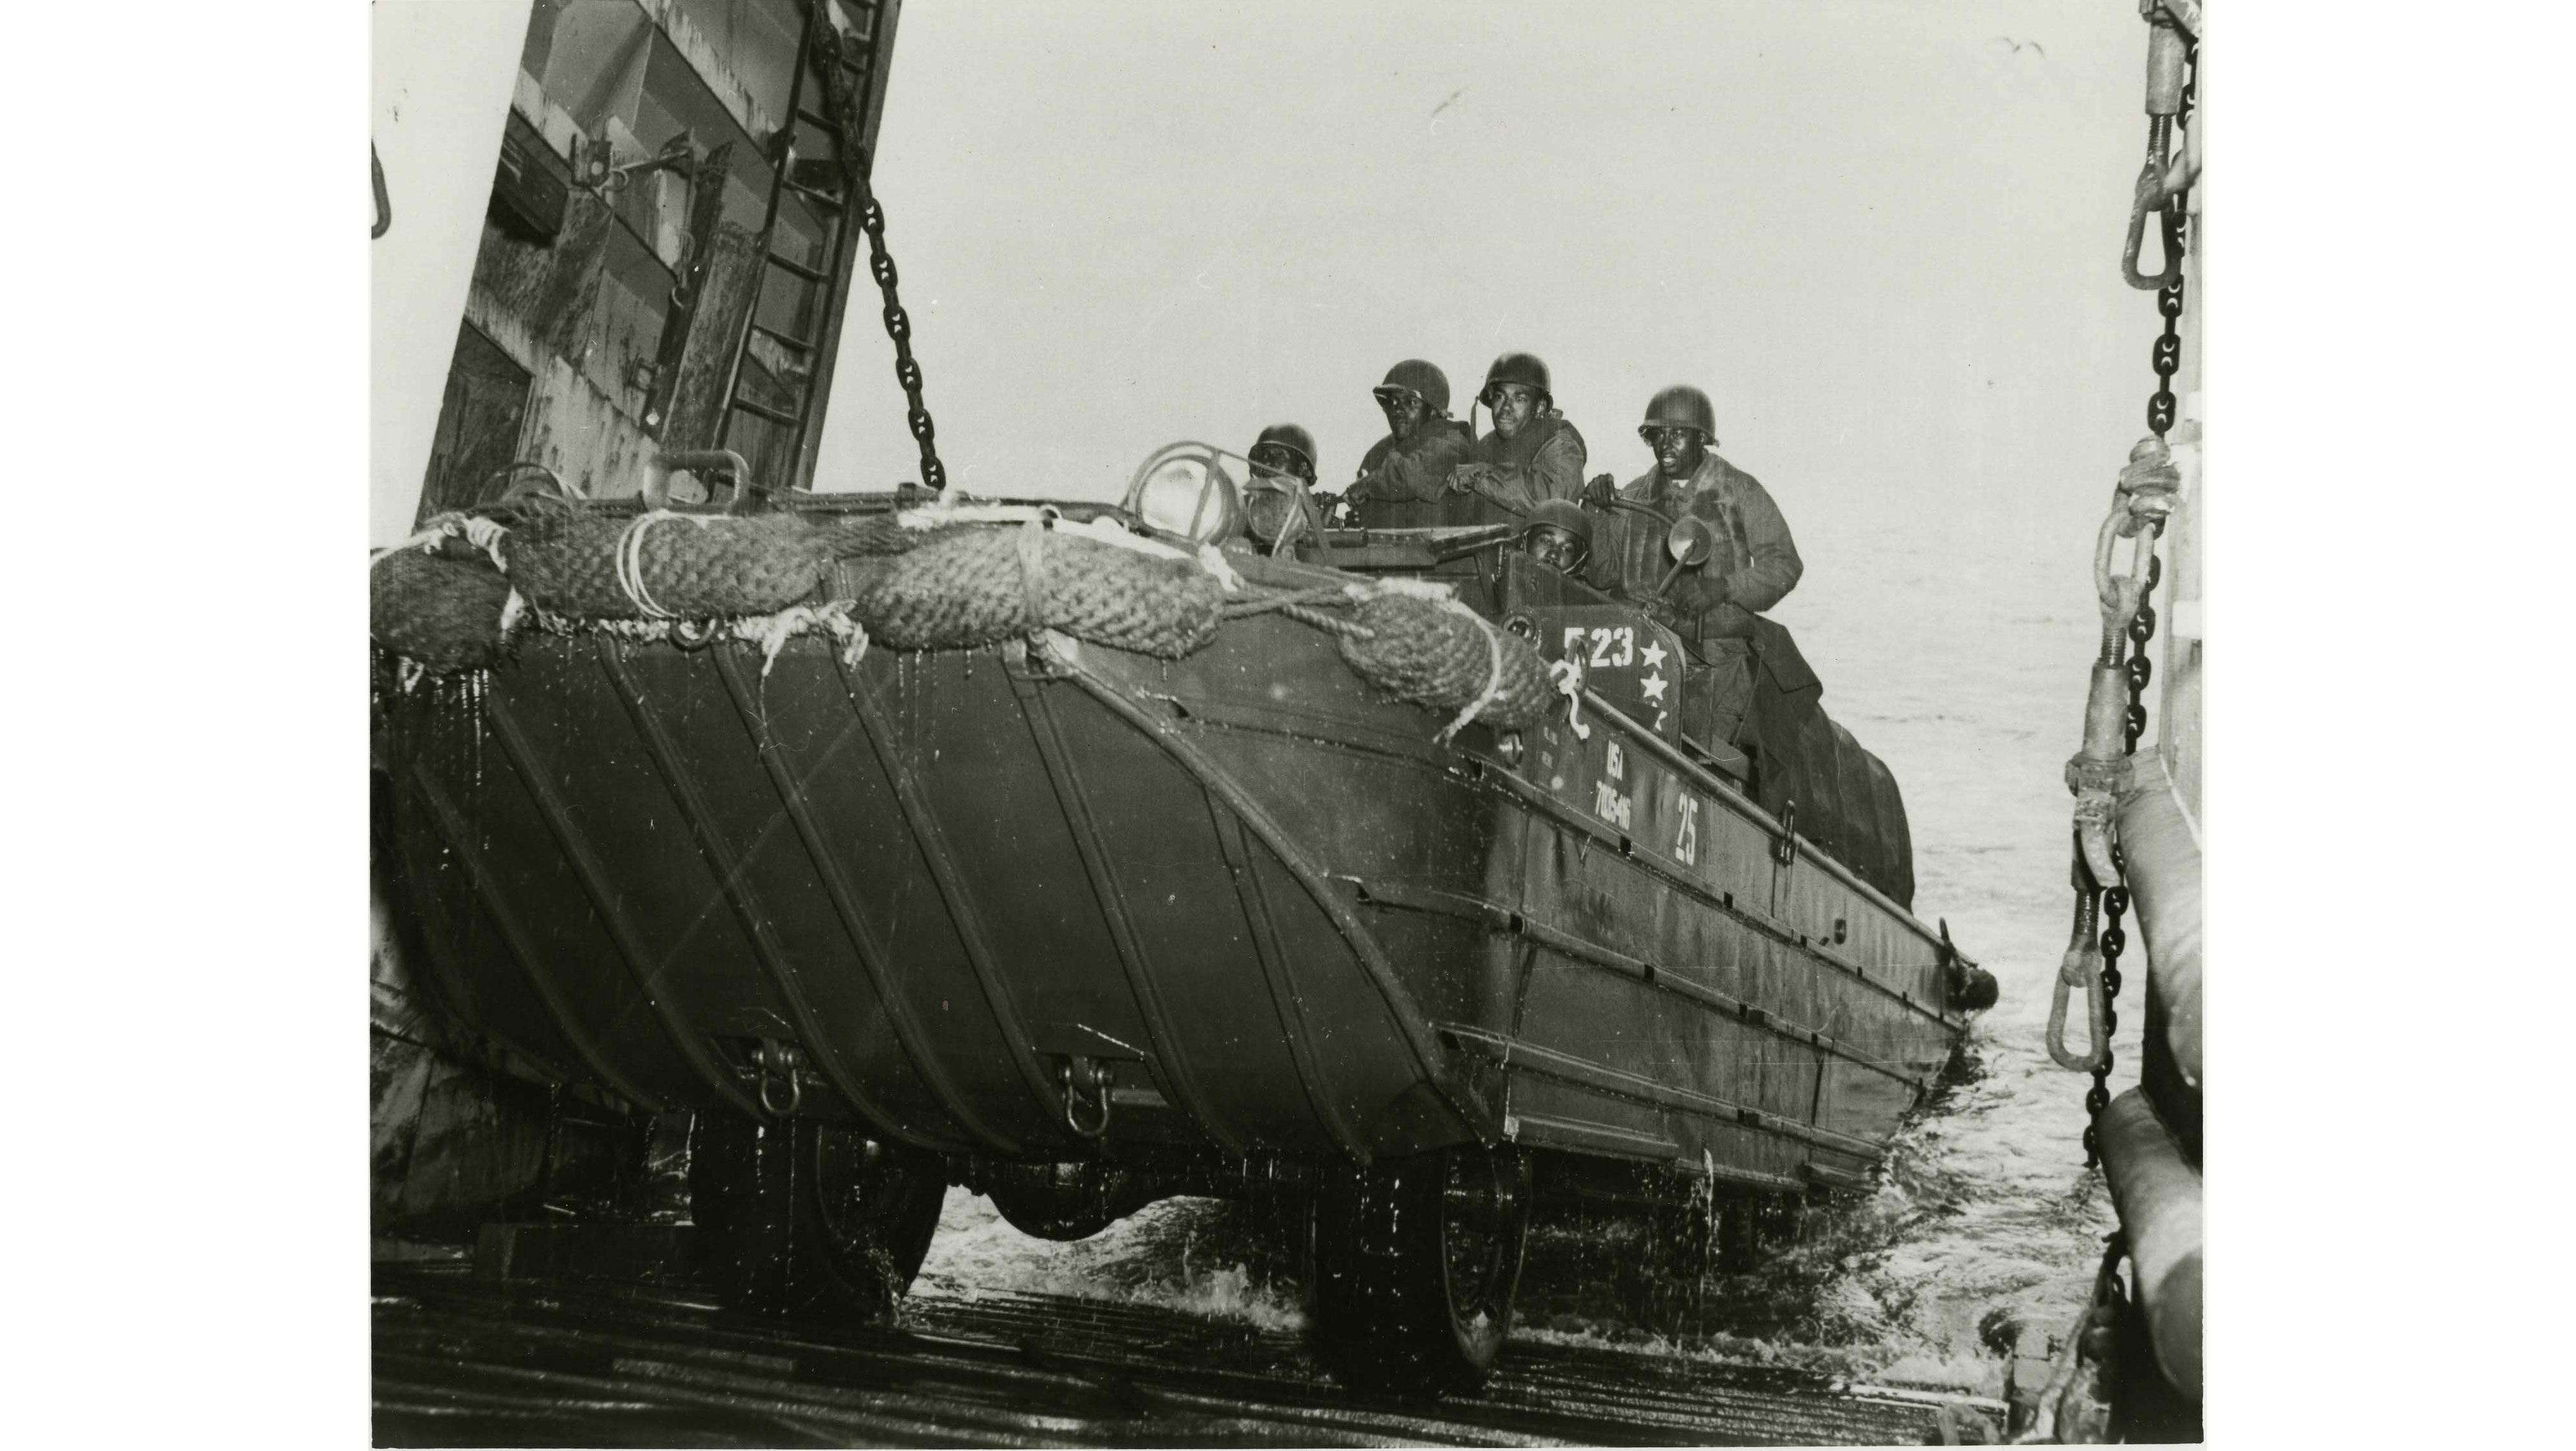 U.S. Army African American troops of the Amphibious Truck Companies supporting the 4th Marine Division at Iwo Jima landings return to the LST.  Part of the research collection of the U.S. Army Transportation Museum.